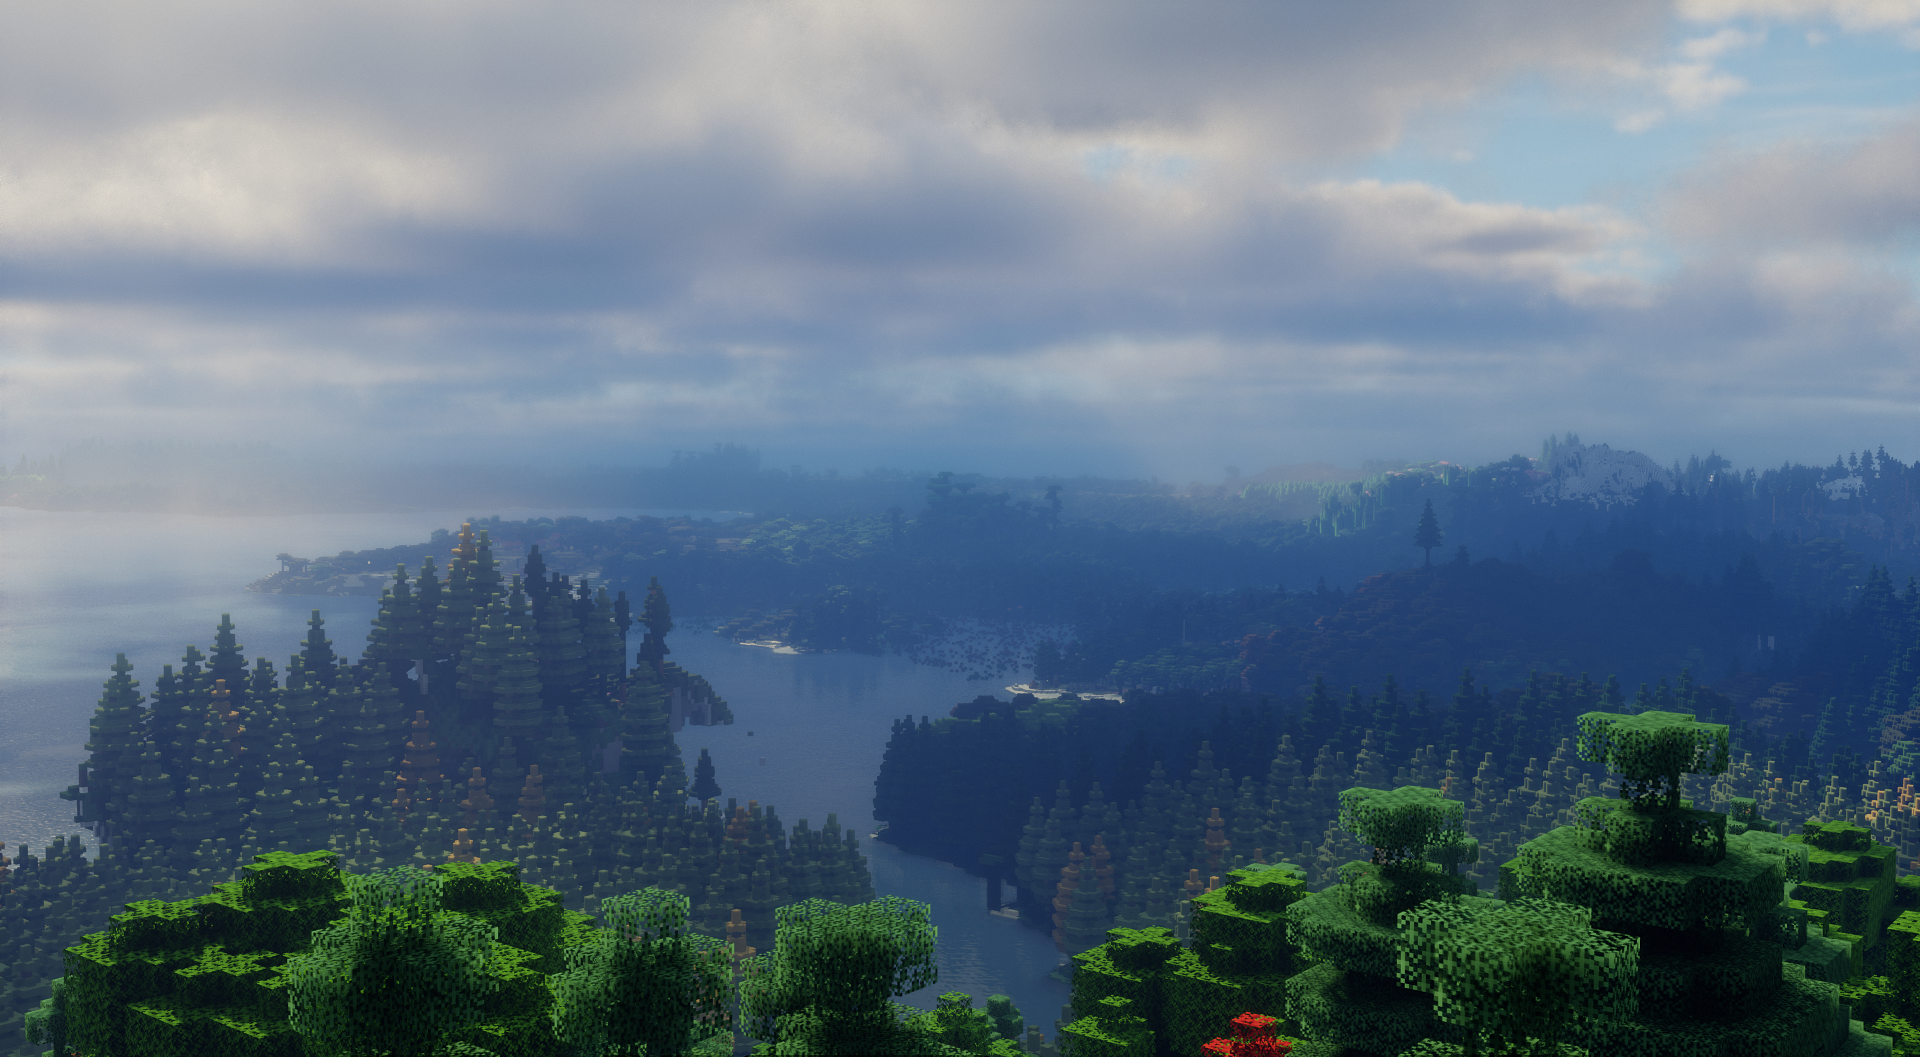 128 chunk render distance most likely